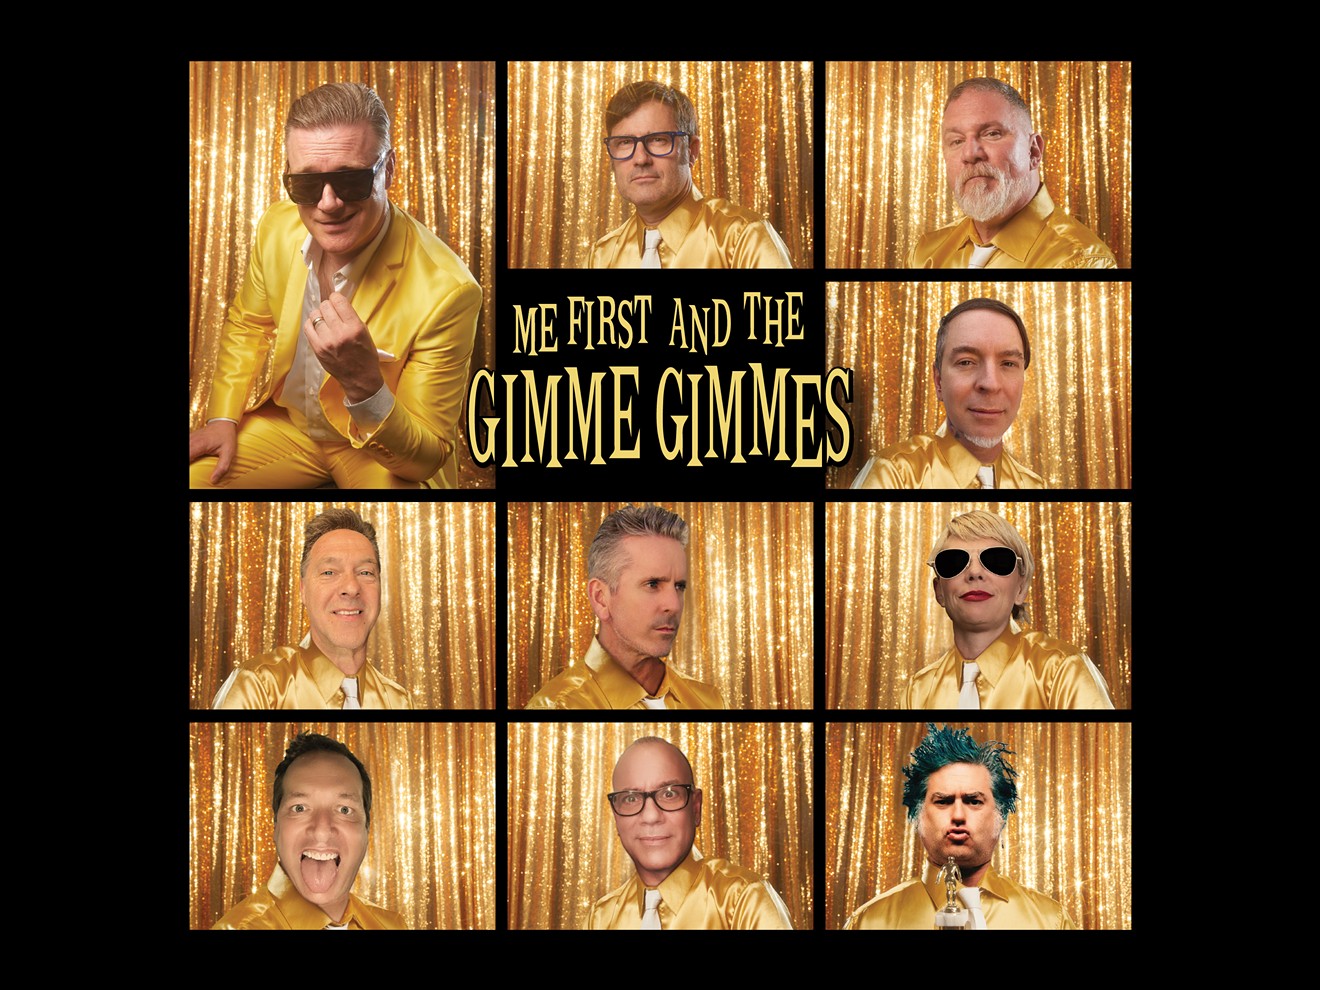 The punk cover band Me First and the Gimme Gimmes, fronted by singer Spike Lawson, top left, will be at Amplified Live on Oct. 27.